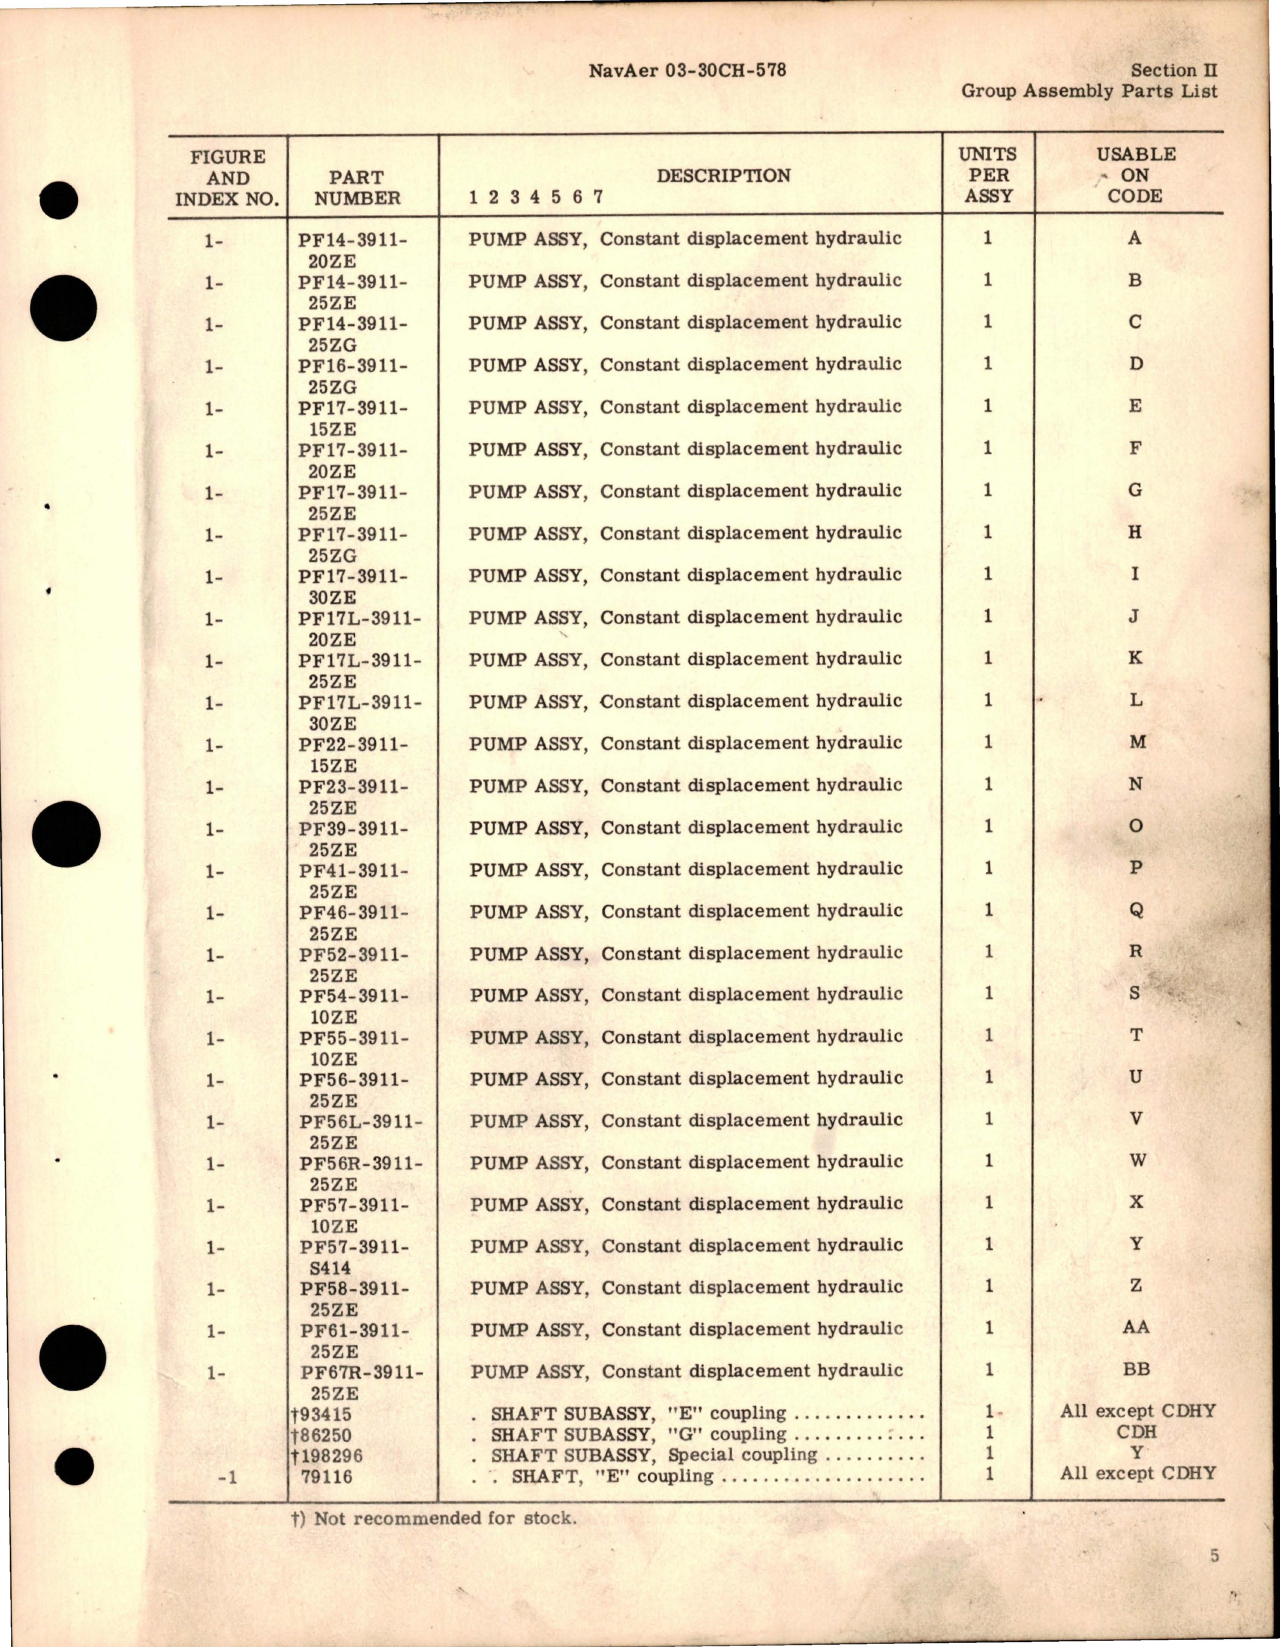 Sample page 7 from AirCorps Library document: Illustrated Parts Breakdown for Constant Displacement Hydraulic Pump Assemblies